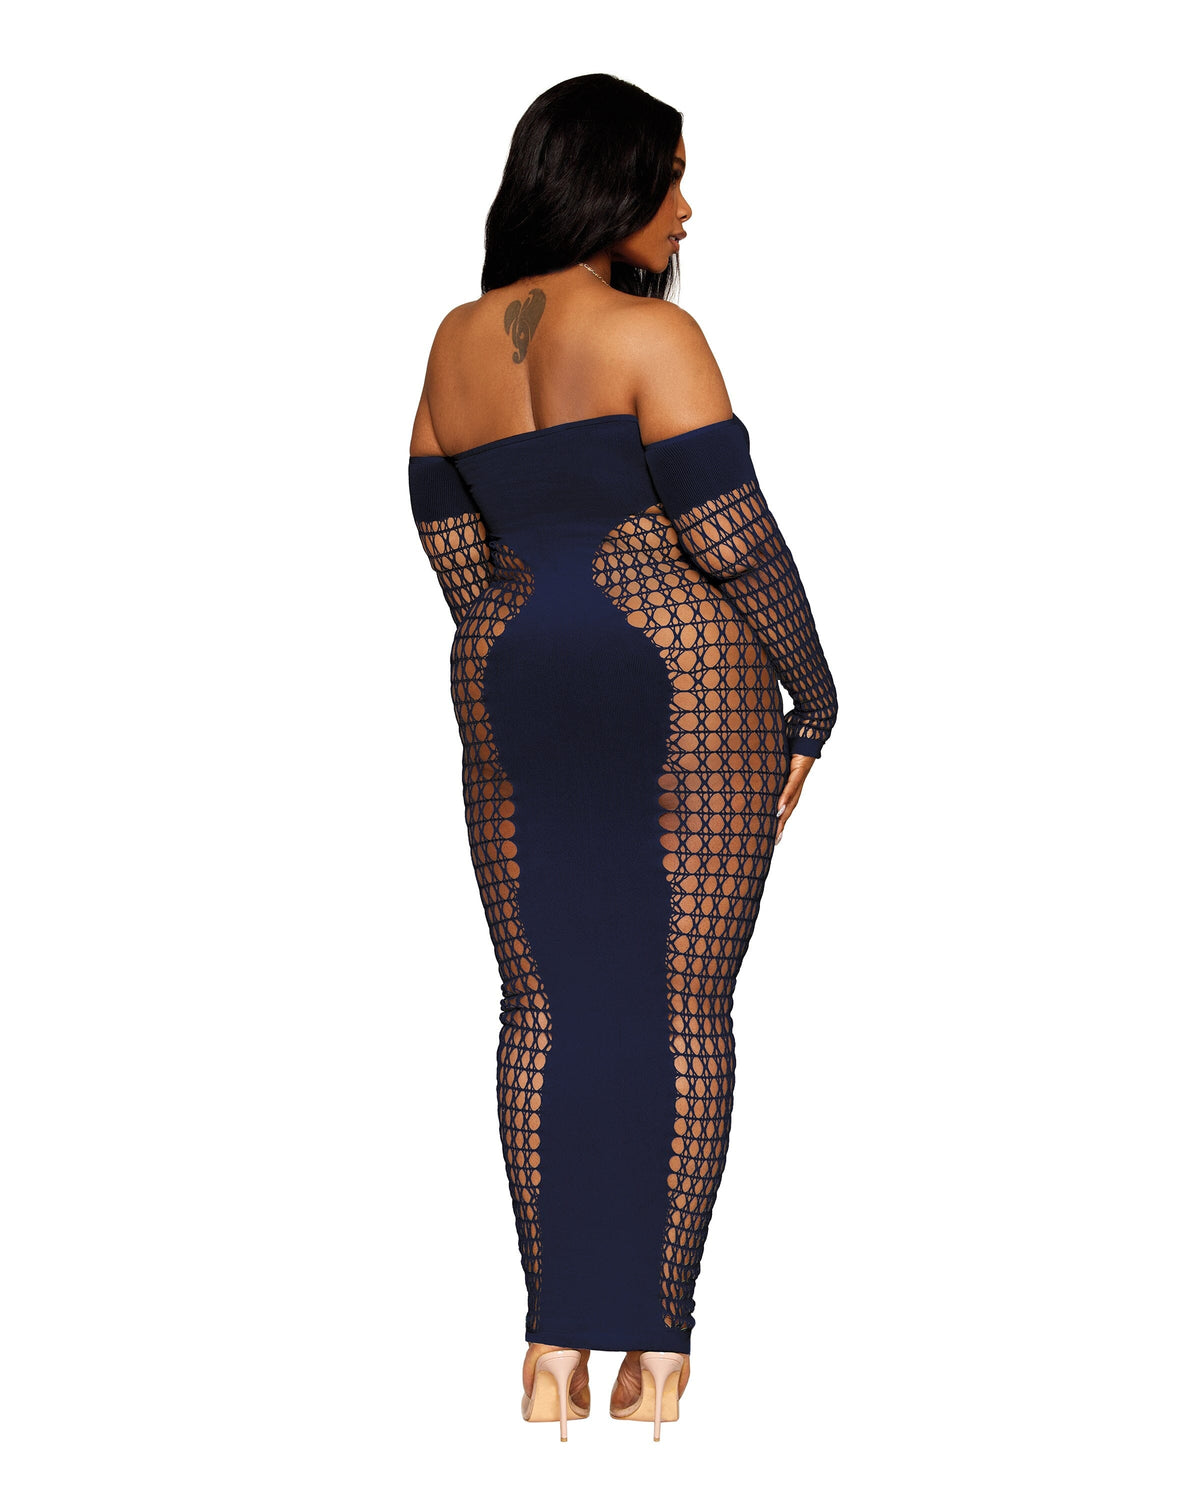 Dreamgirl Fishnet Bodystocking with Knitted Teddy - 0326, Color